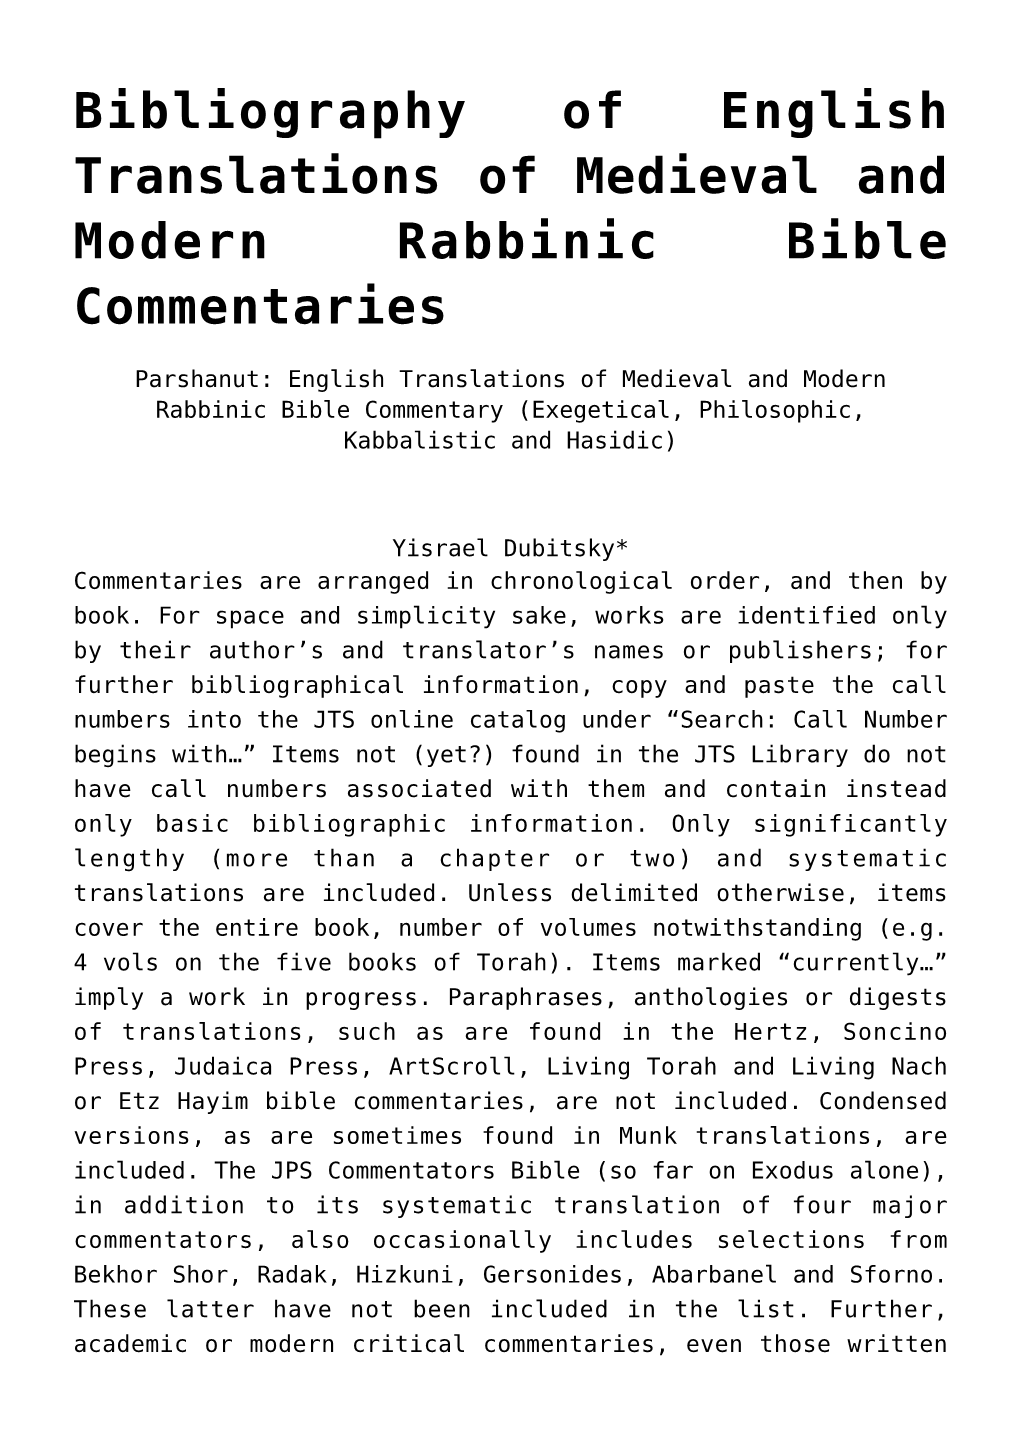 Bibliography of English Translations of Medieval and Modern Rabbinic Bible Commentaries